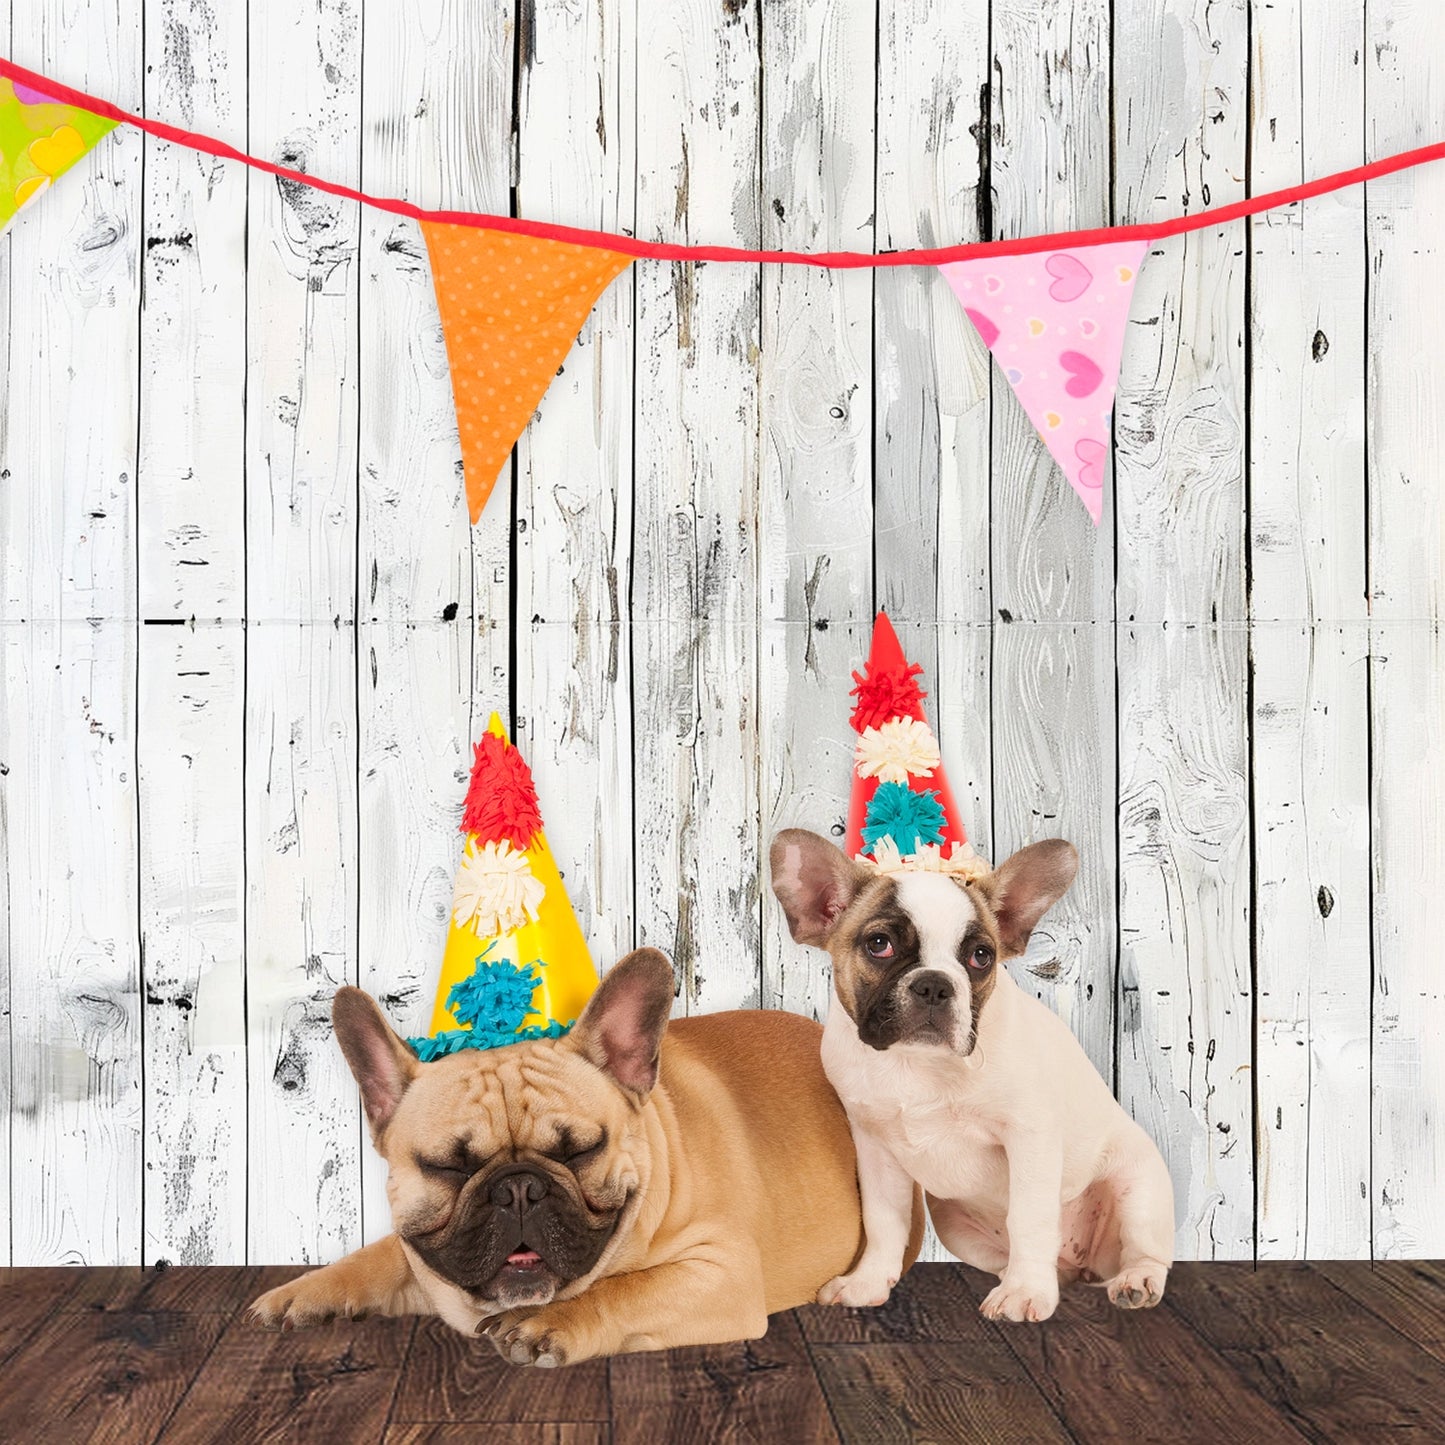 Two French bulldogs wearing party hats, one sitting and one lying down, in front of an ideasbackdrop Wood Backdrop Retro Rustic White Gray Wooden Floor Background for Photography Kids Photo Booth Video Shoot Studio Prop with colorful bunting hanging above.